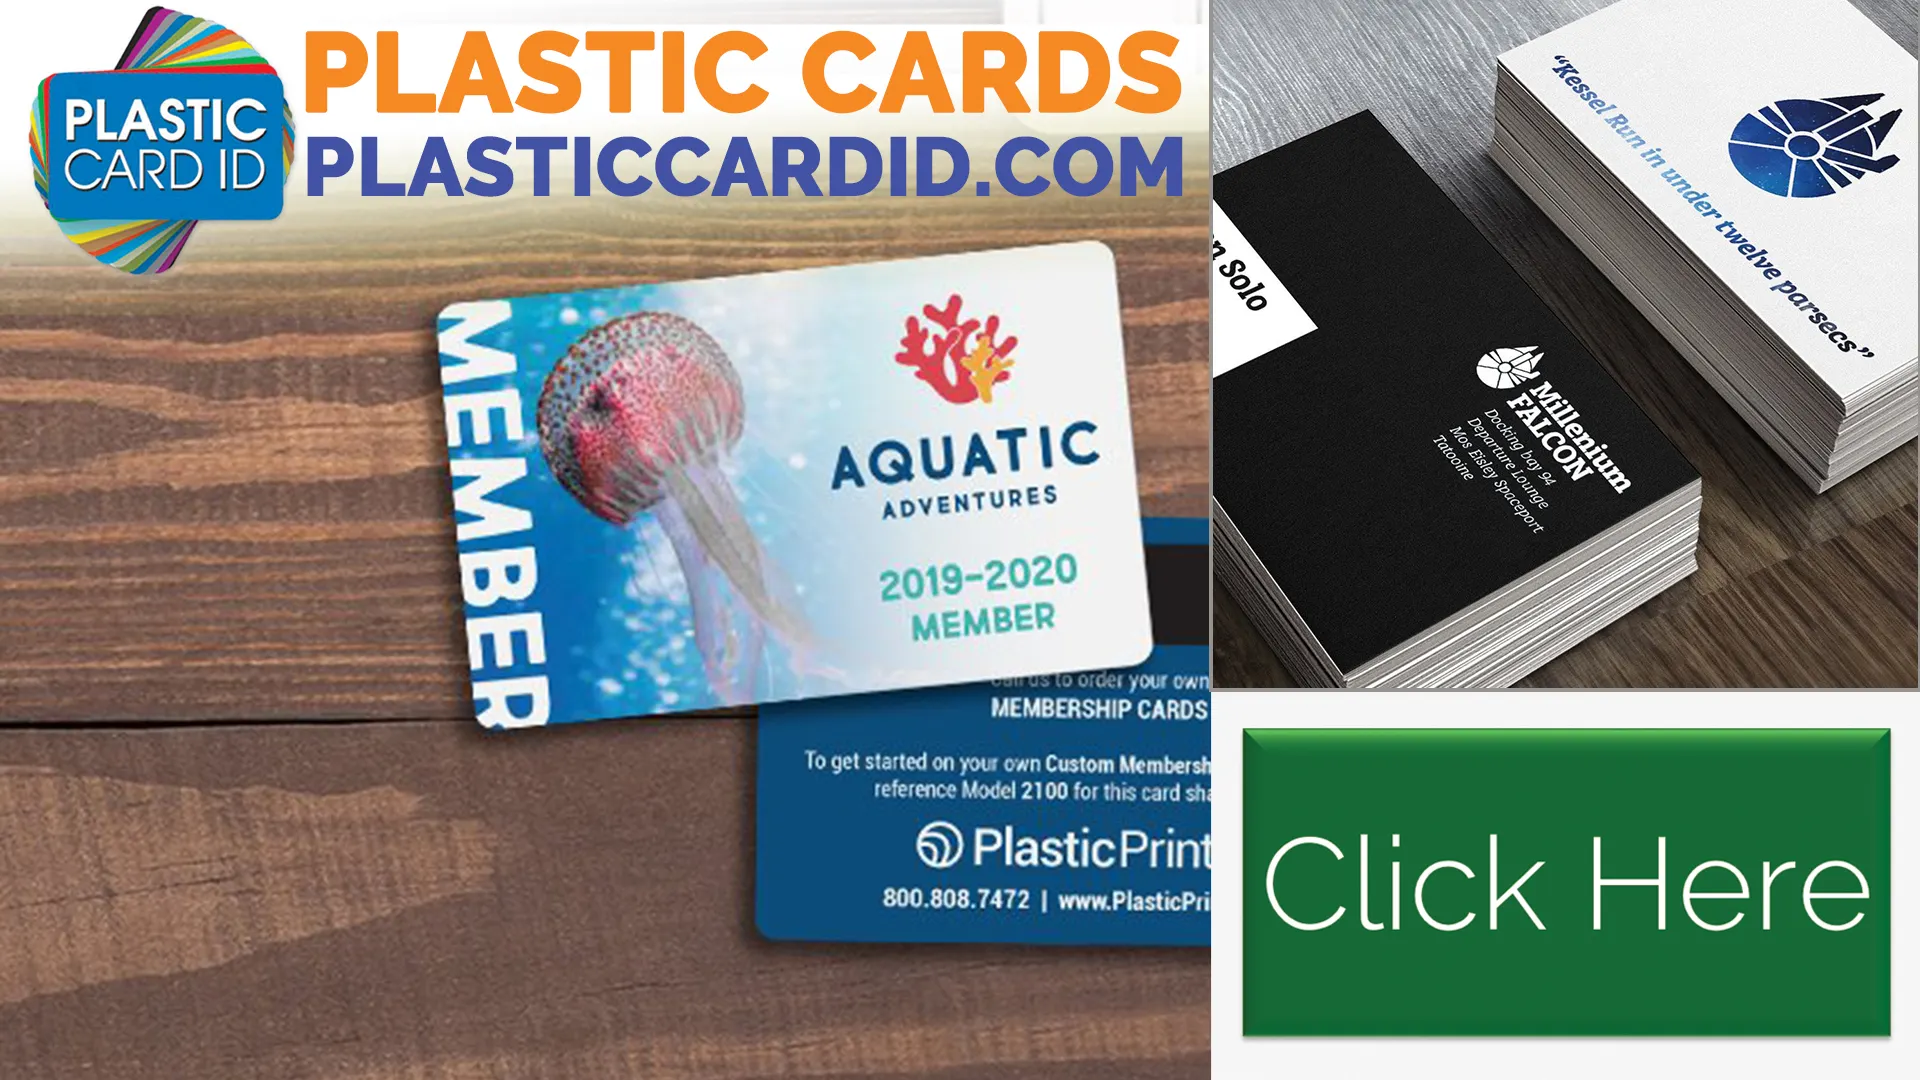 Cultivating Customer Loyalty with Expertly Crafted Plastic Cards